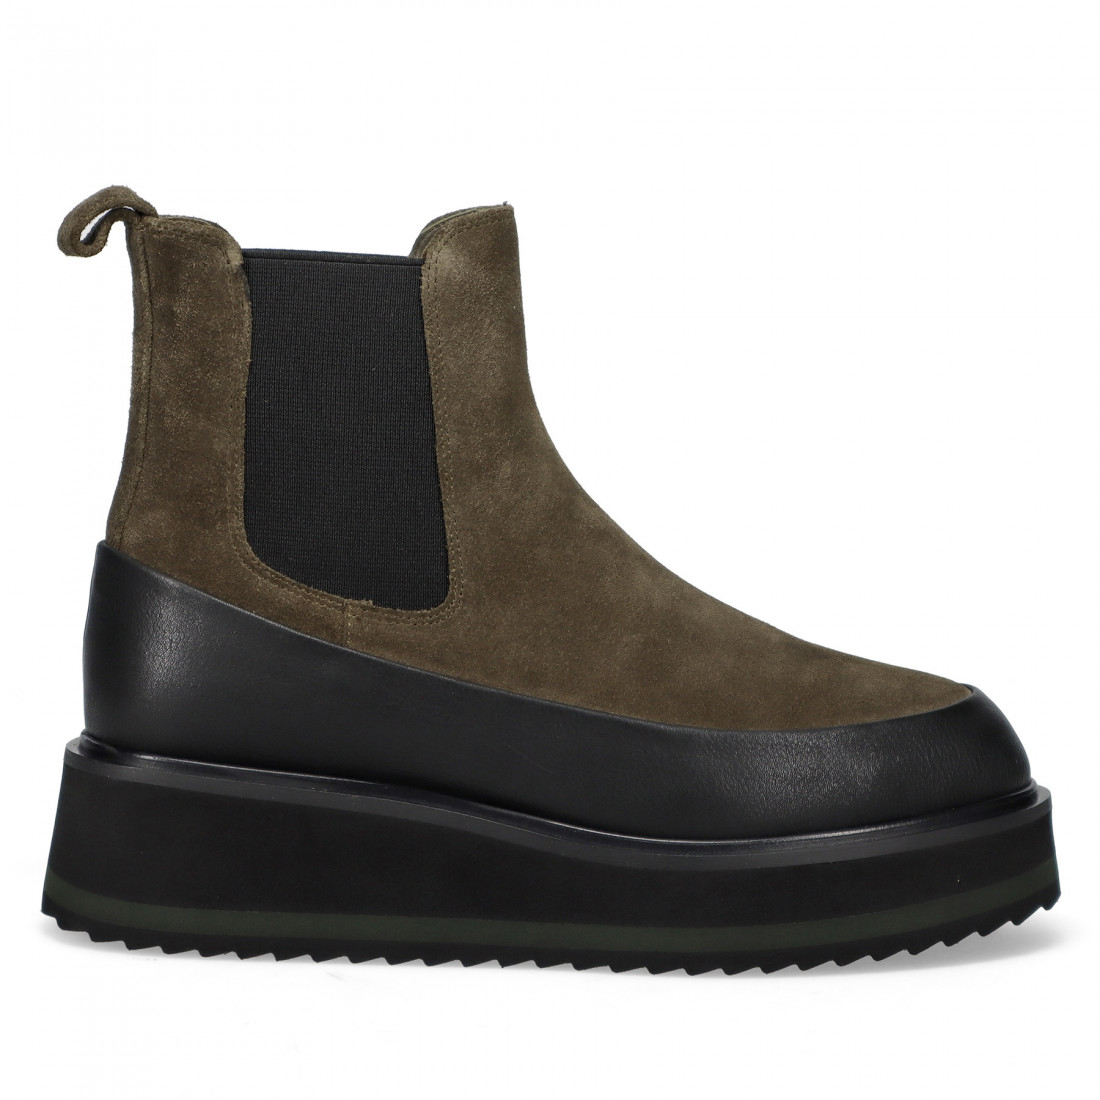 Rahya Gray Chelsea boot in olive suede with low wedge